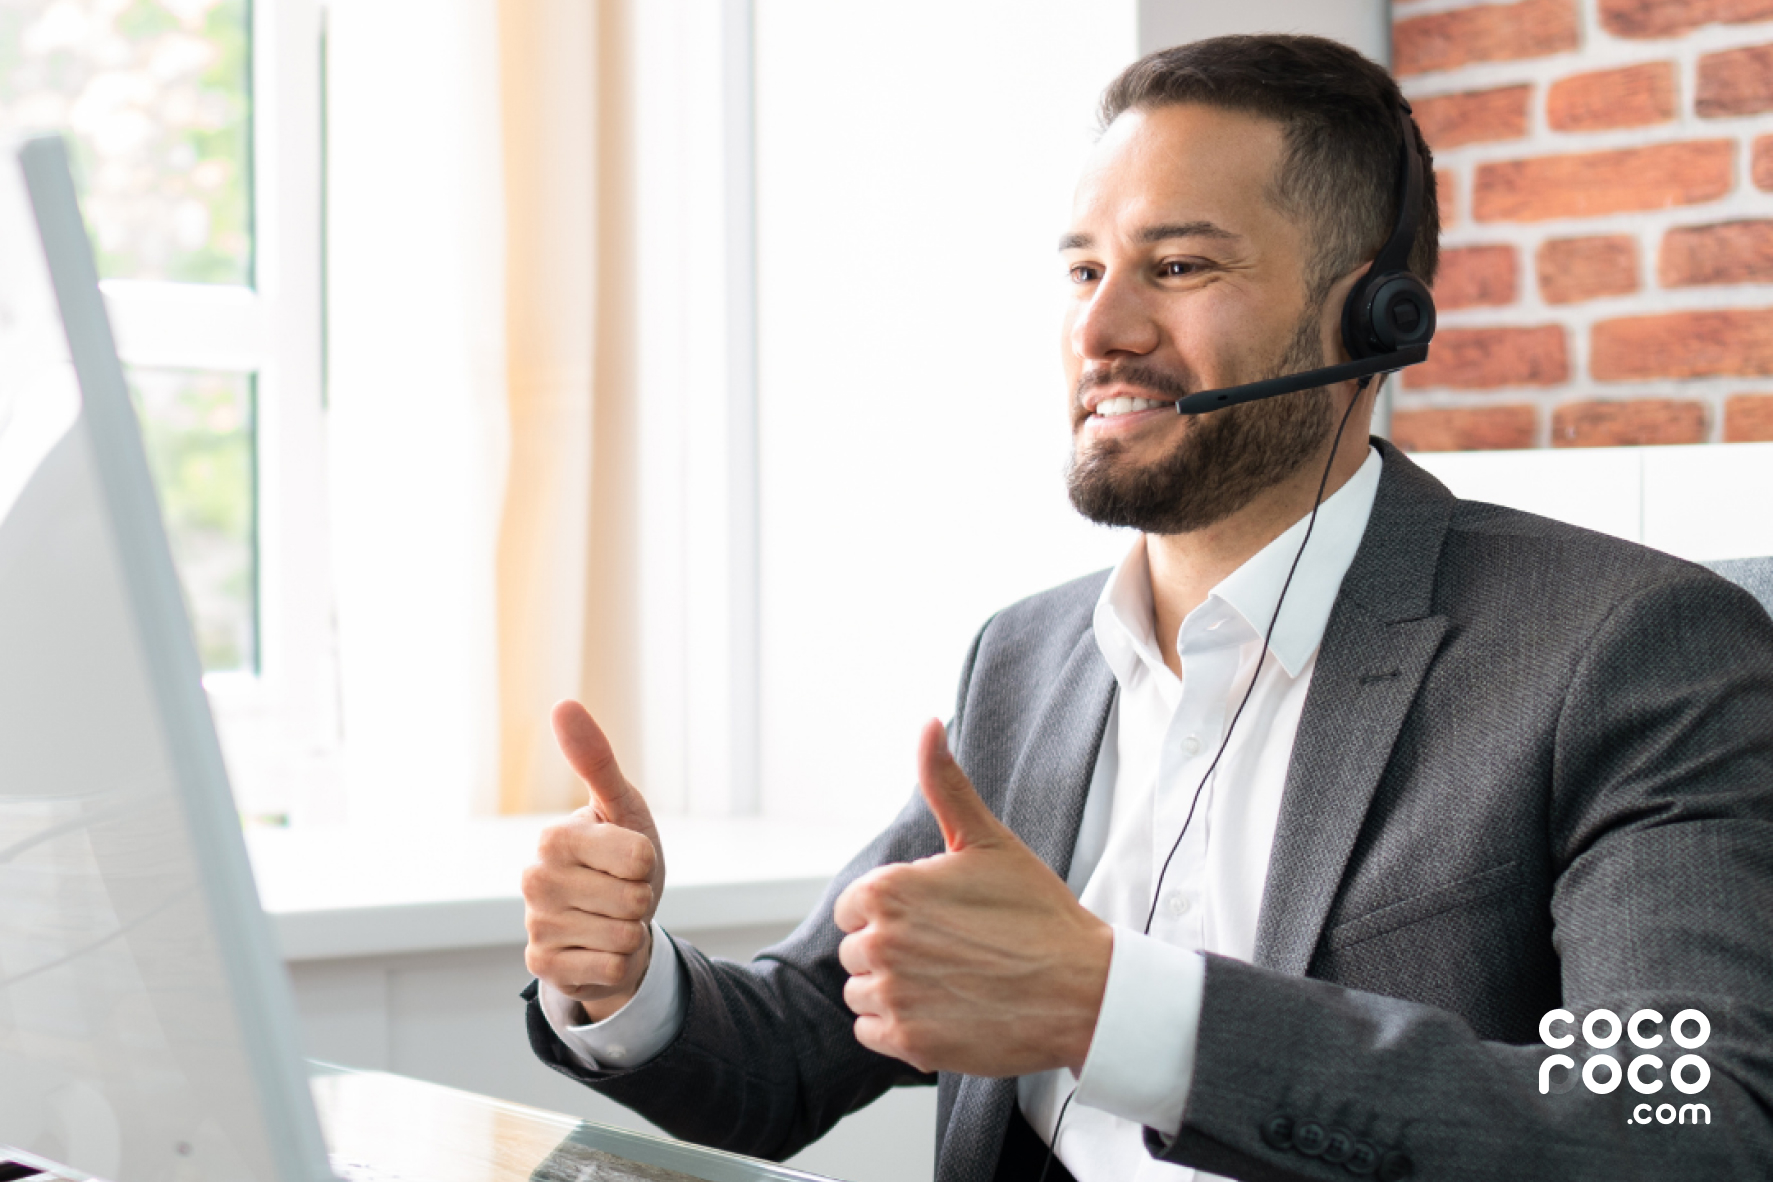 An image of a customer service agent smiling with both thumbs up. The agent is wearing a headset and appears to be helpful and approachable, conveying a positive attitude towards customers.